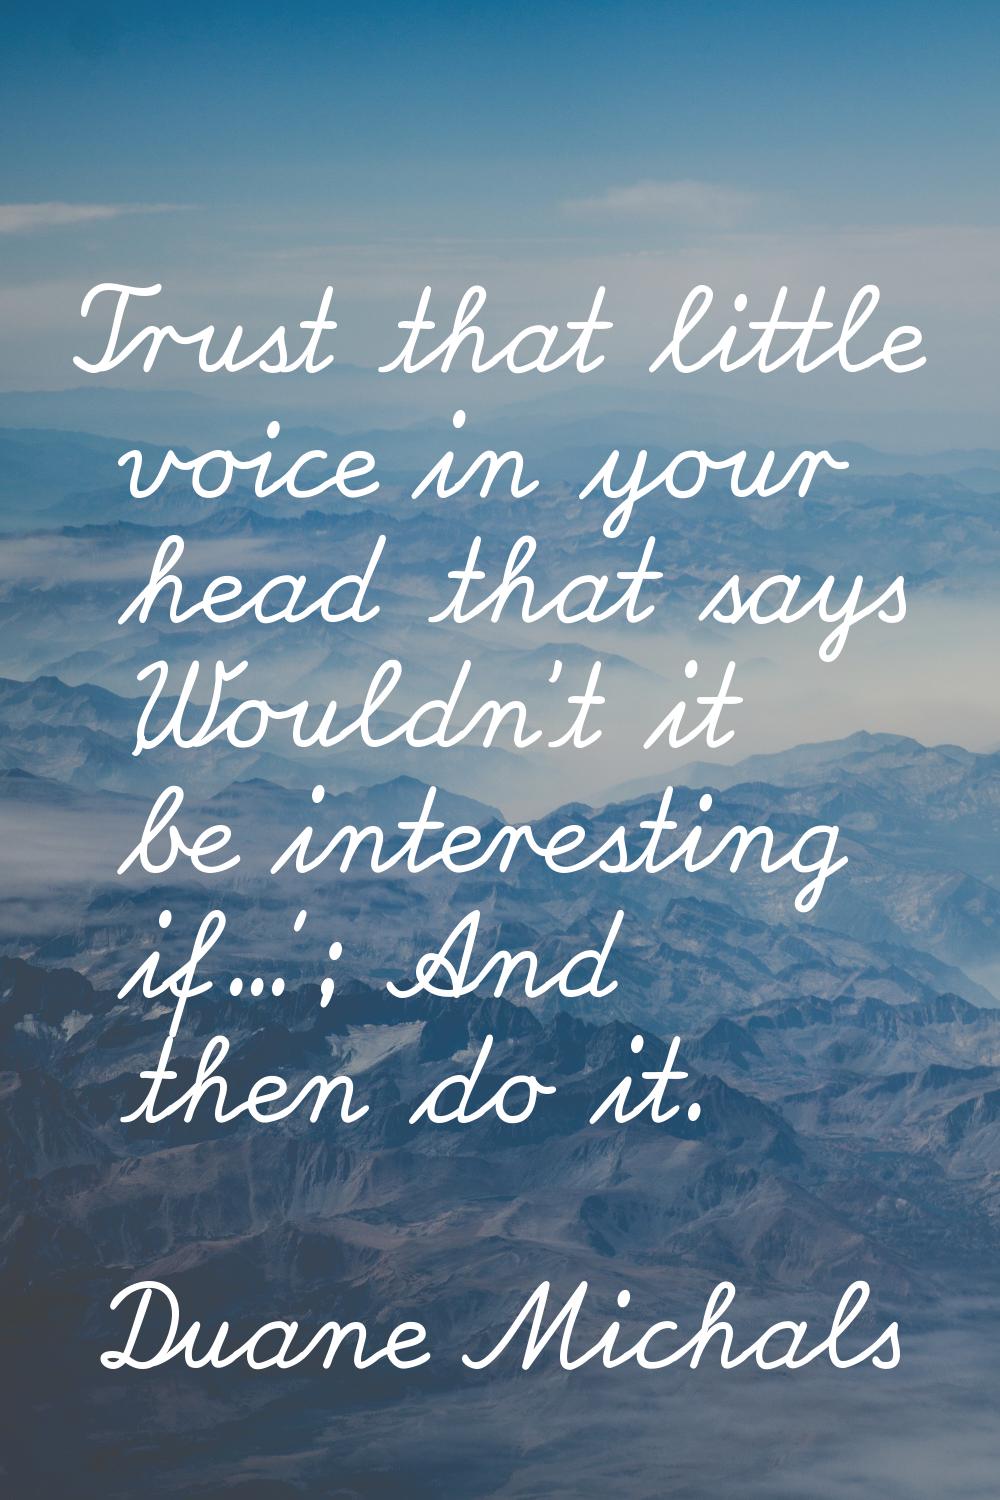 Trust that little voice in your head that says 'Wouldn't it be interesting if...'; And then do it.